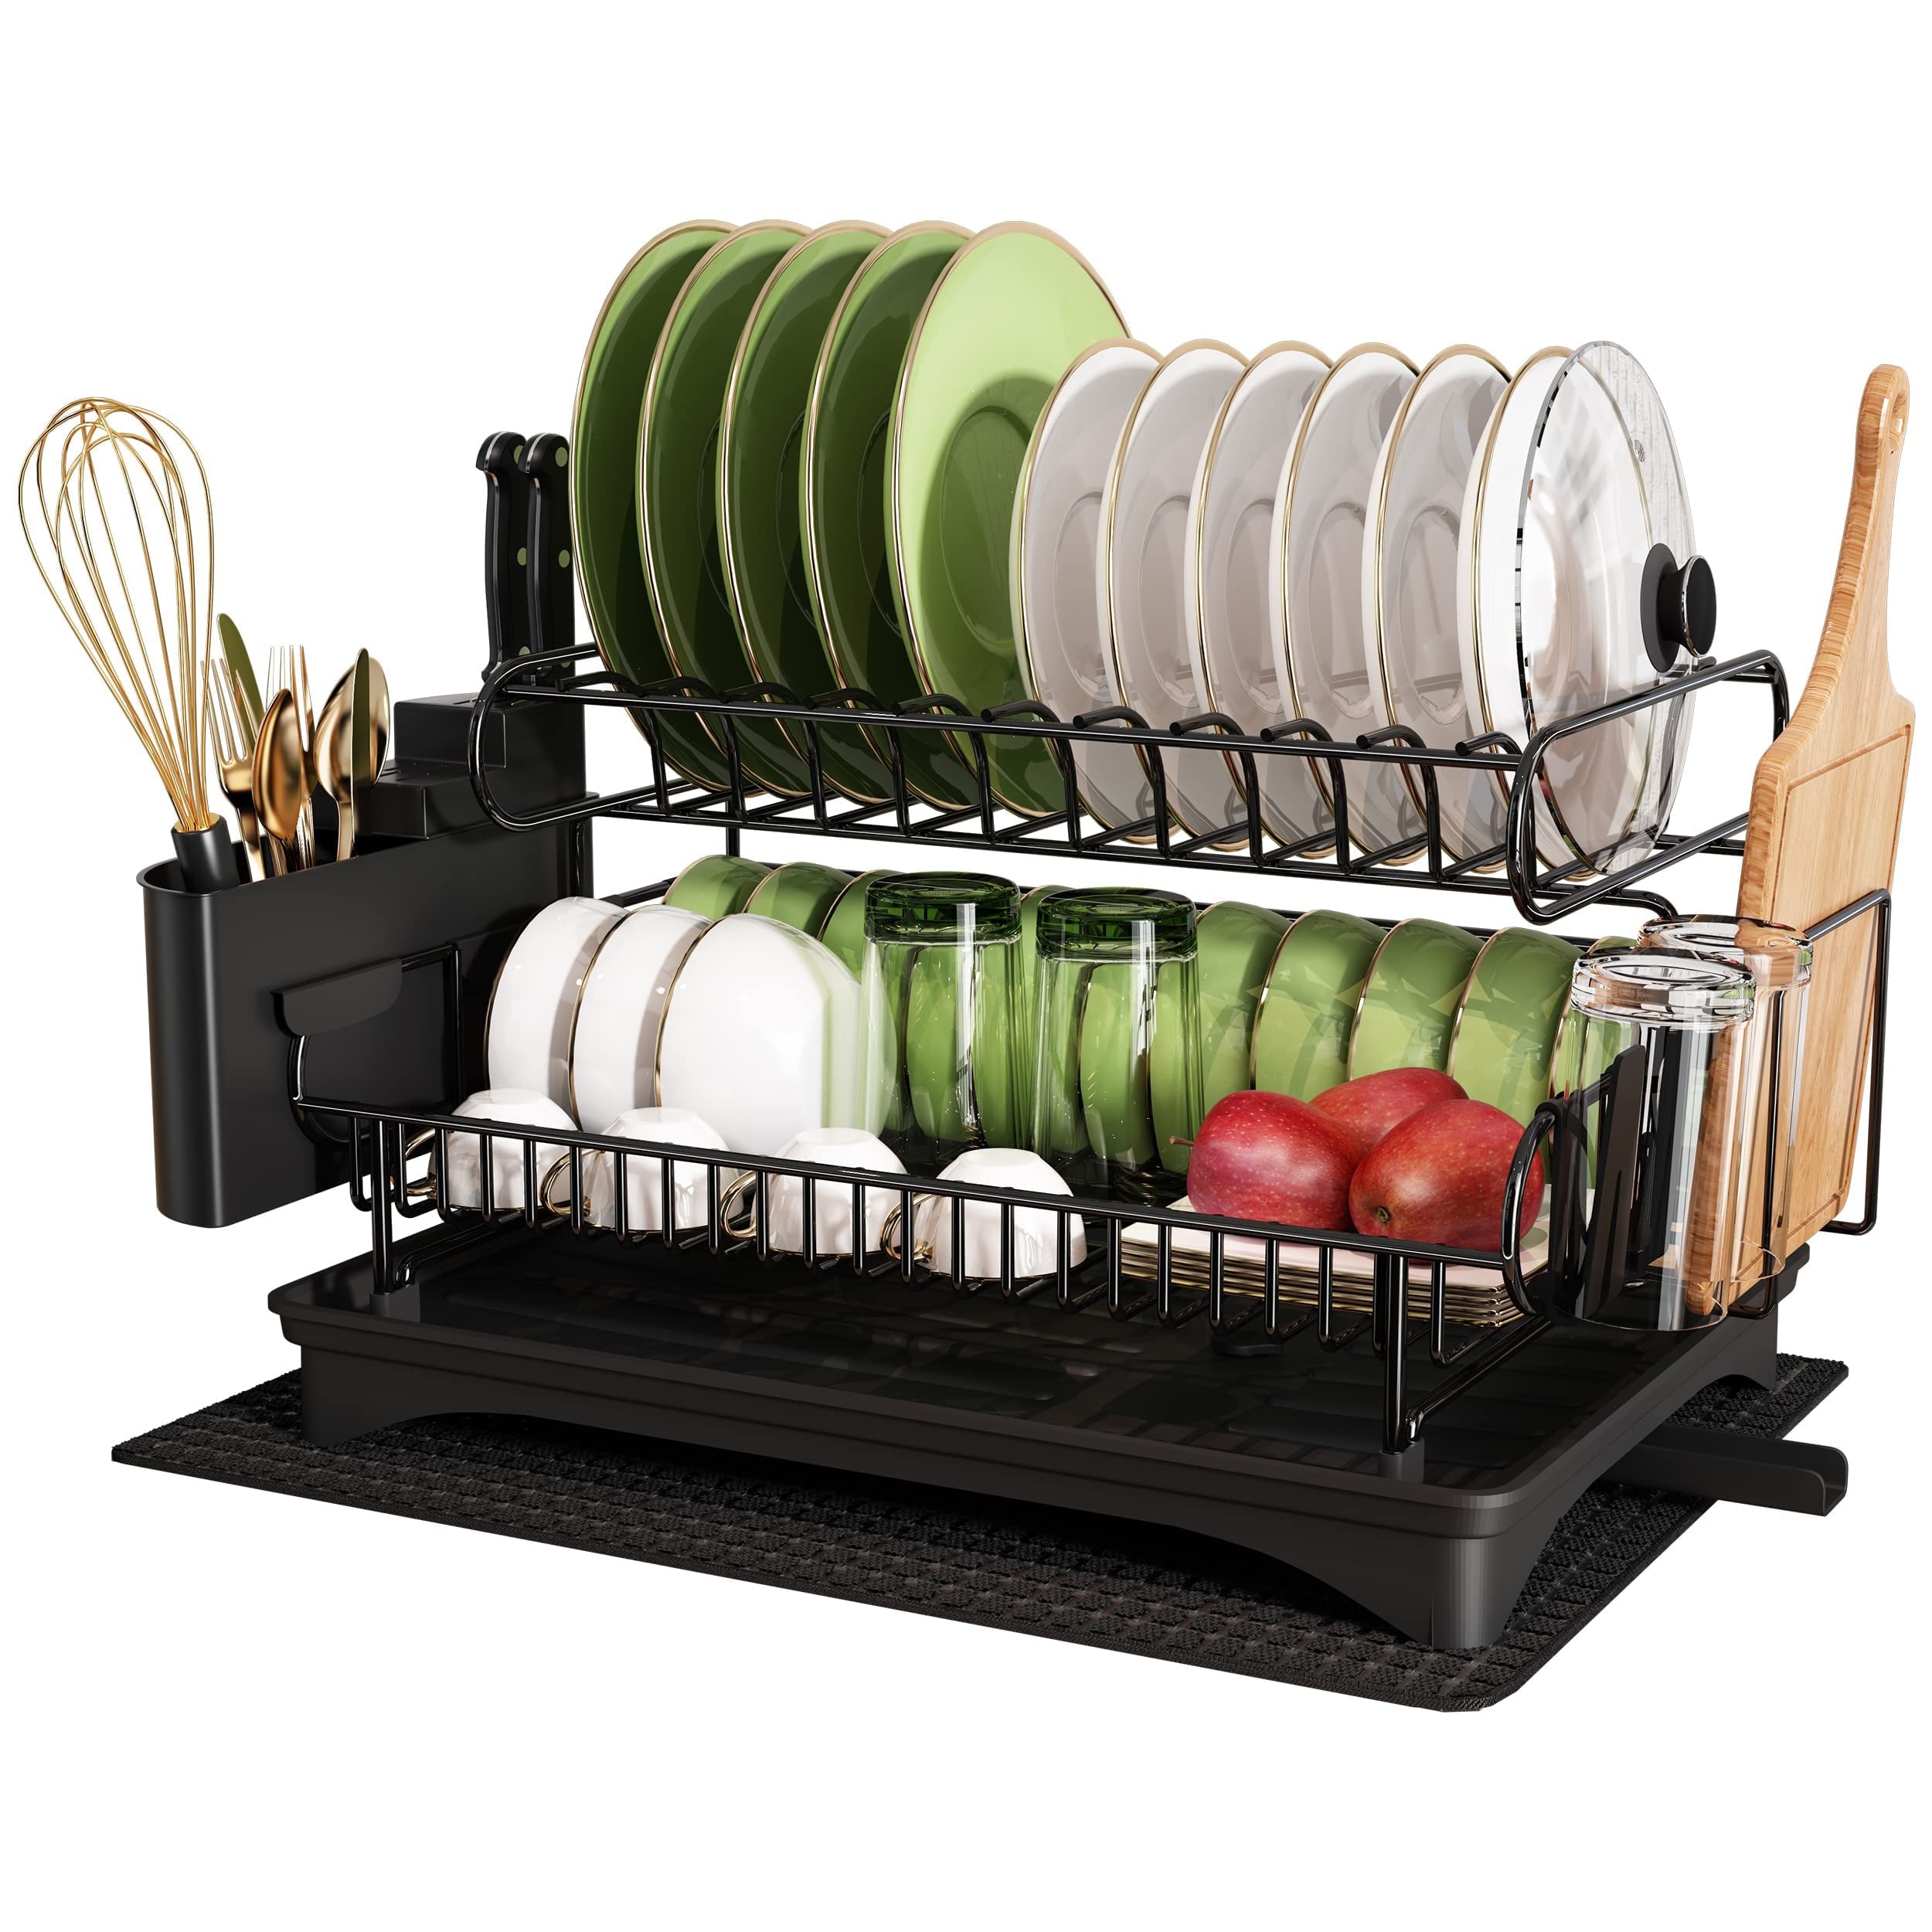 Mimifly Stainless Steel Dish Drainer Plate Rack, Extendable Dish Drying  Rack Basket for Fruits Vegetables Pots Bowls Plates and Kitchen Utensils 